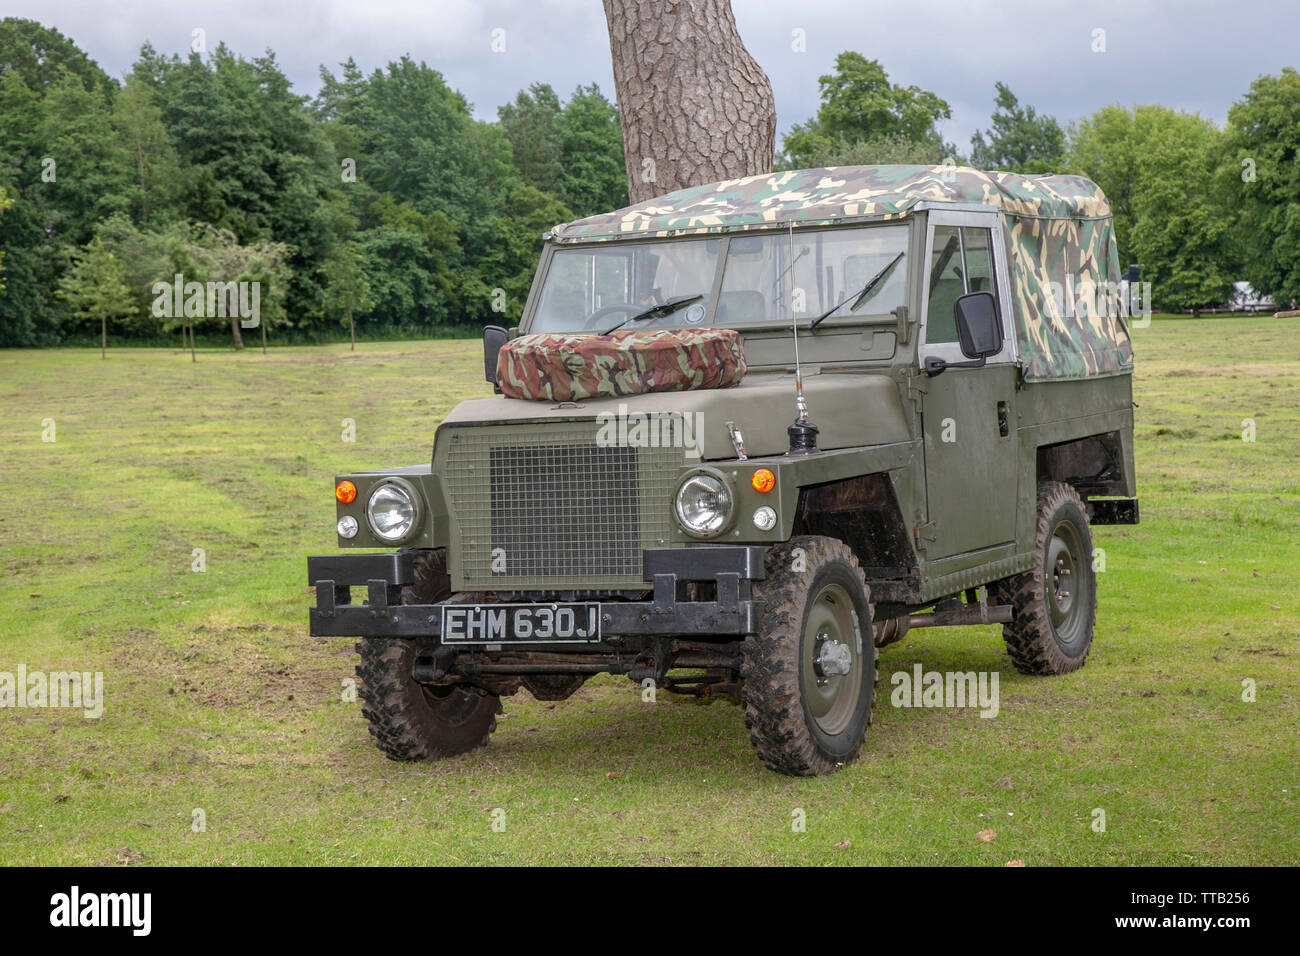 1970 70s Green army 88 Land rover, military restored vehicles at Leyland Festival, UK. The Army Land Rover series I, II, and III are off-road vehicles produced by the British manufacturer. Station Wagon camouflage military Land Rovers, were made available in both 88-inch (2,200 mm) and 109-inch (2,800 mm) types. Stock Photo